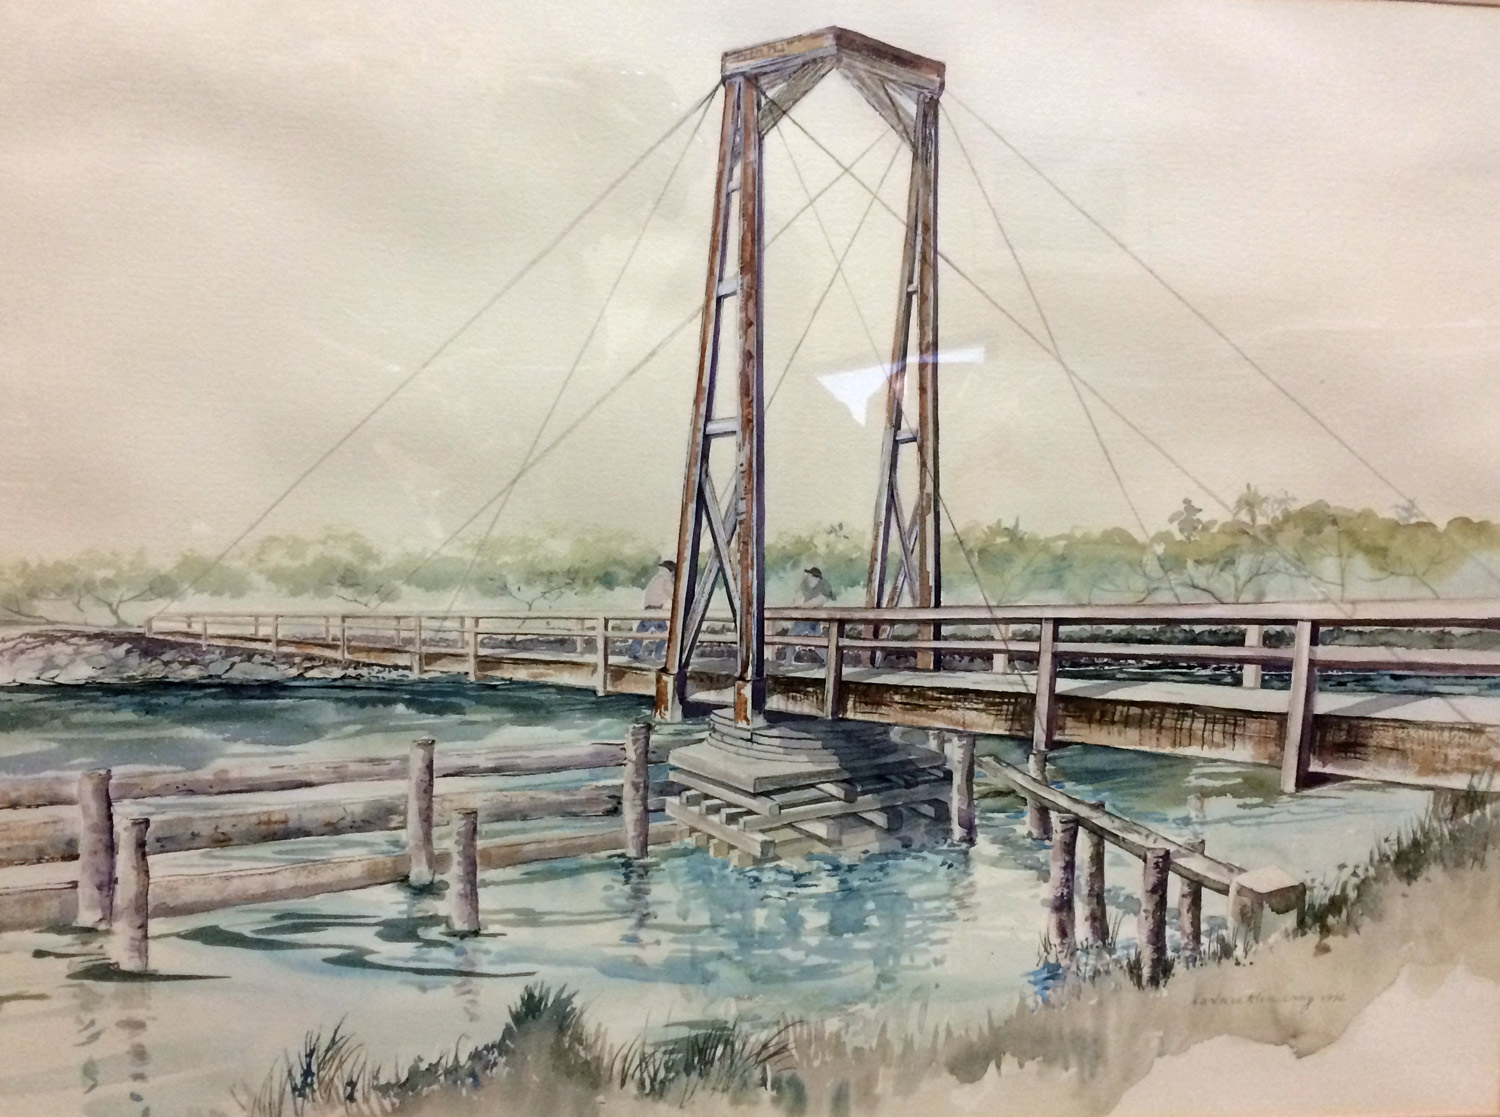 A beautiful original watercolor by Barbara Klein Craig, painted in 1992, of an old turnstile bridge over the Intracoastal. Flagler County Commissioners personally bought the watercolor at the Carver Gym Auction to benefit the Carver Center. The painting will now hang in Commission chambers in perpetuity. (© FlaglerLive)